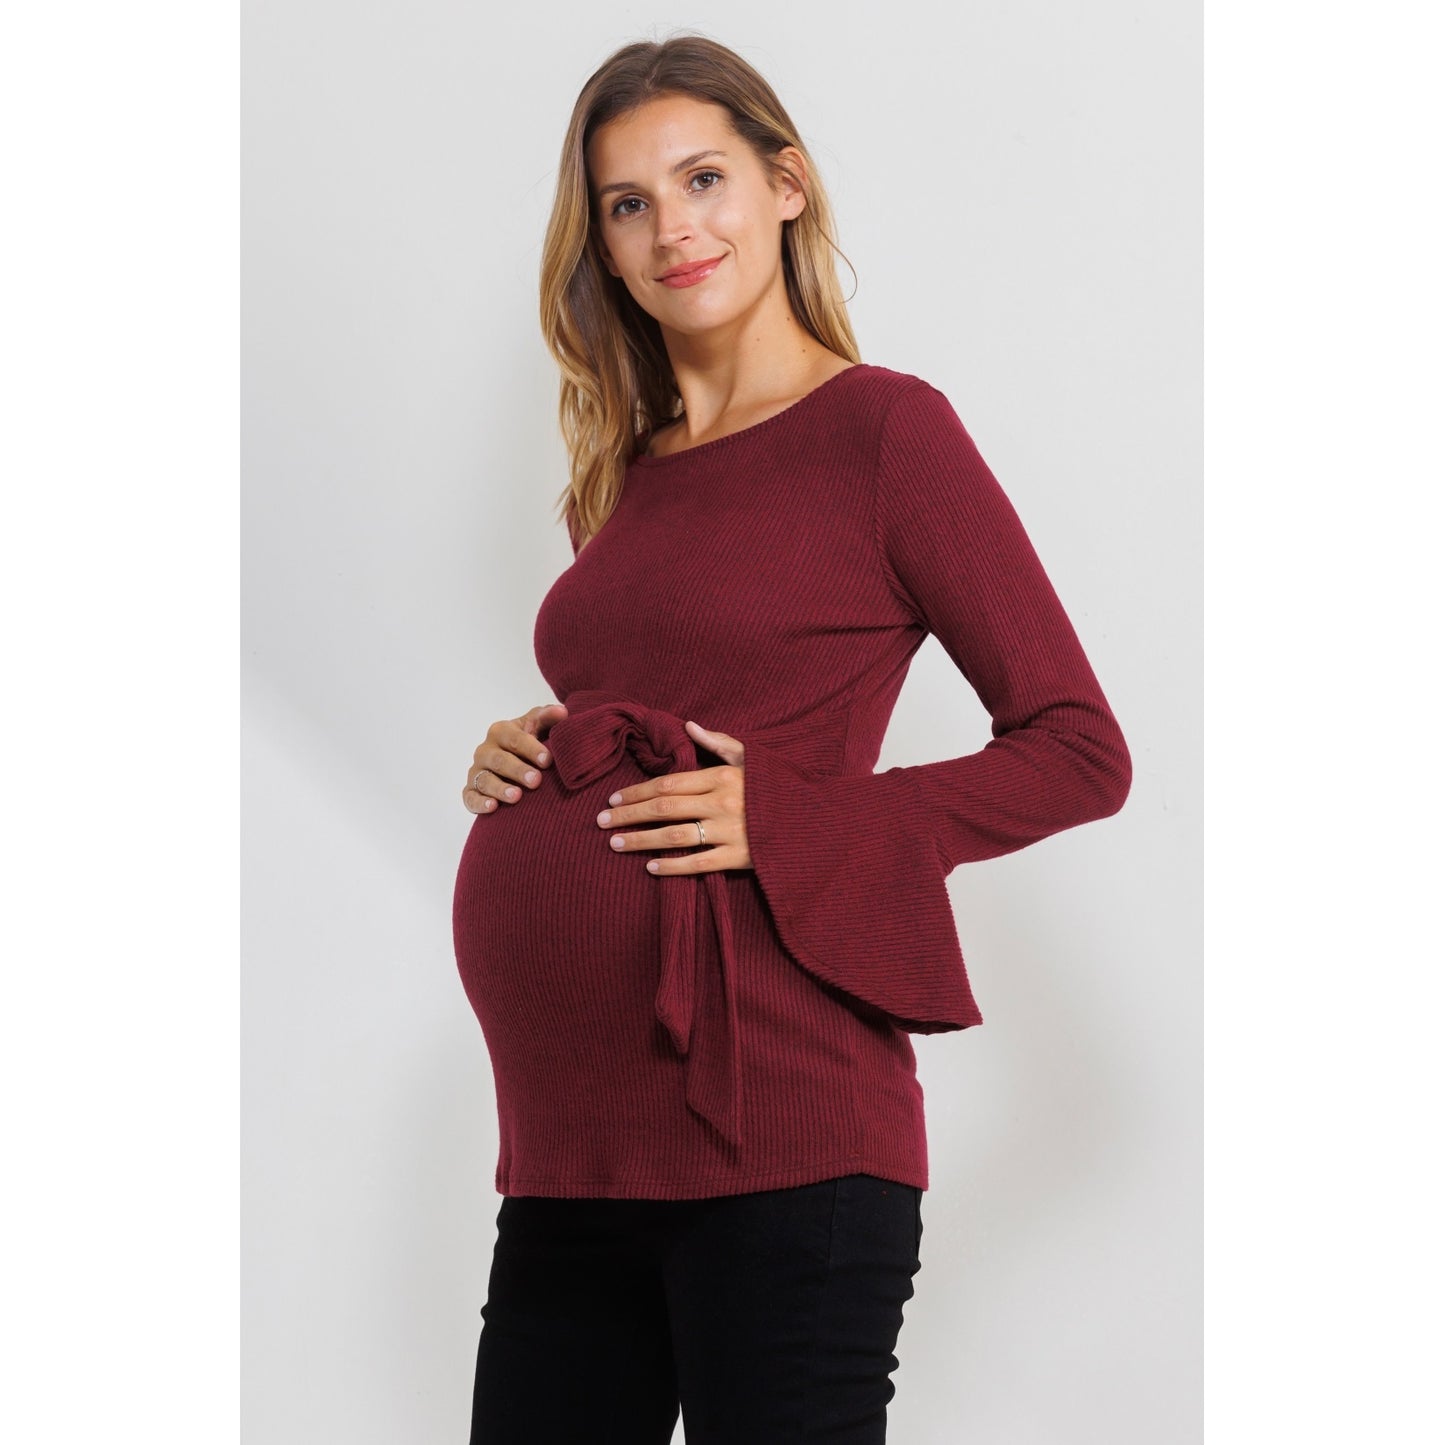 Maternity Shirt with Bell Sleeves| Burgundy